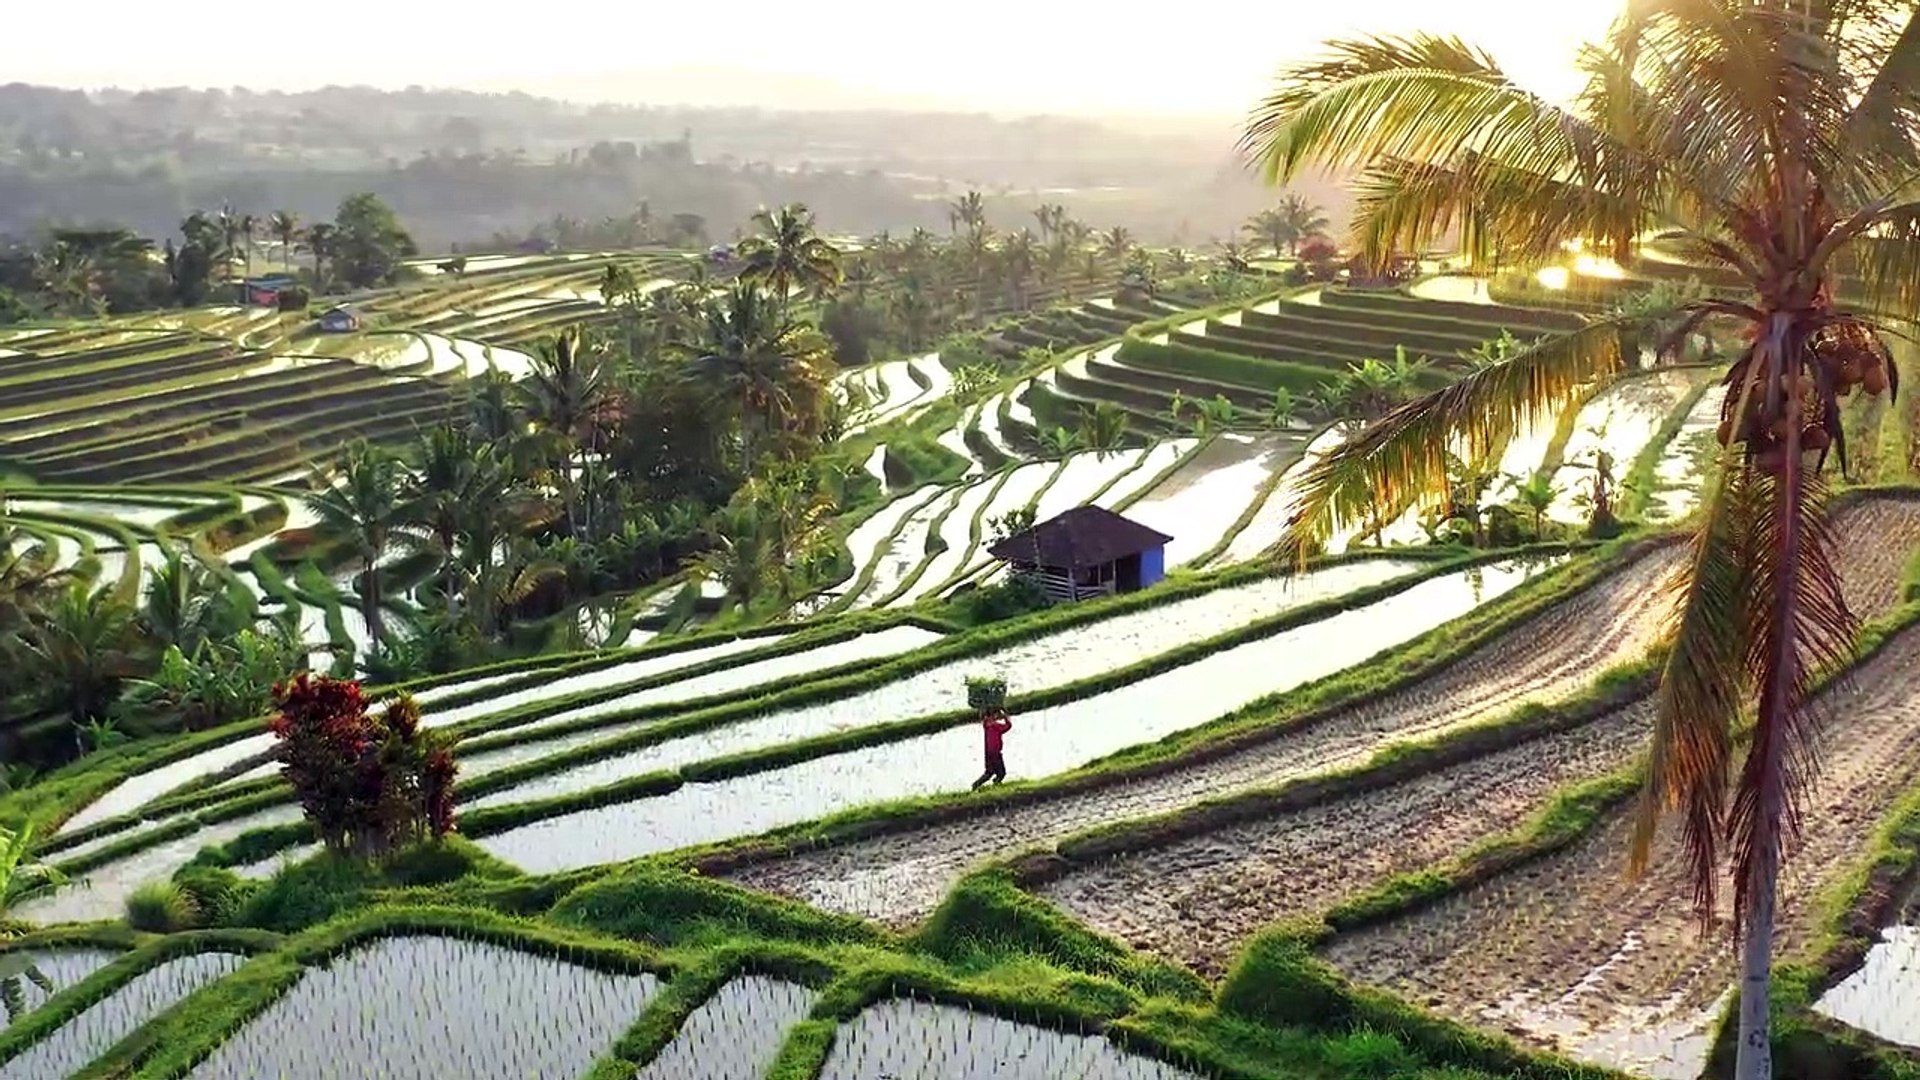 Bali in 8k ULTRA HD HDR -  Paradise of Asia (60 FPS)